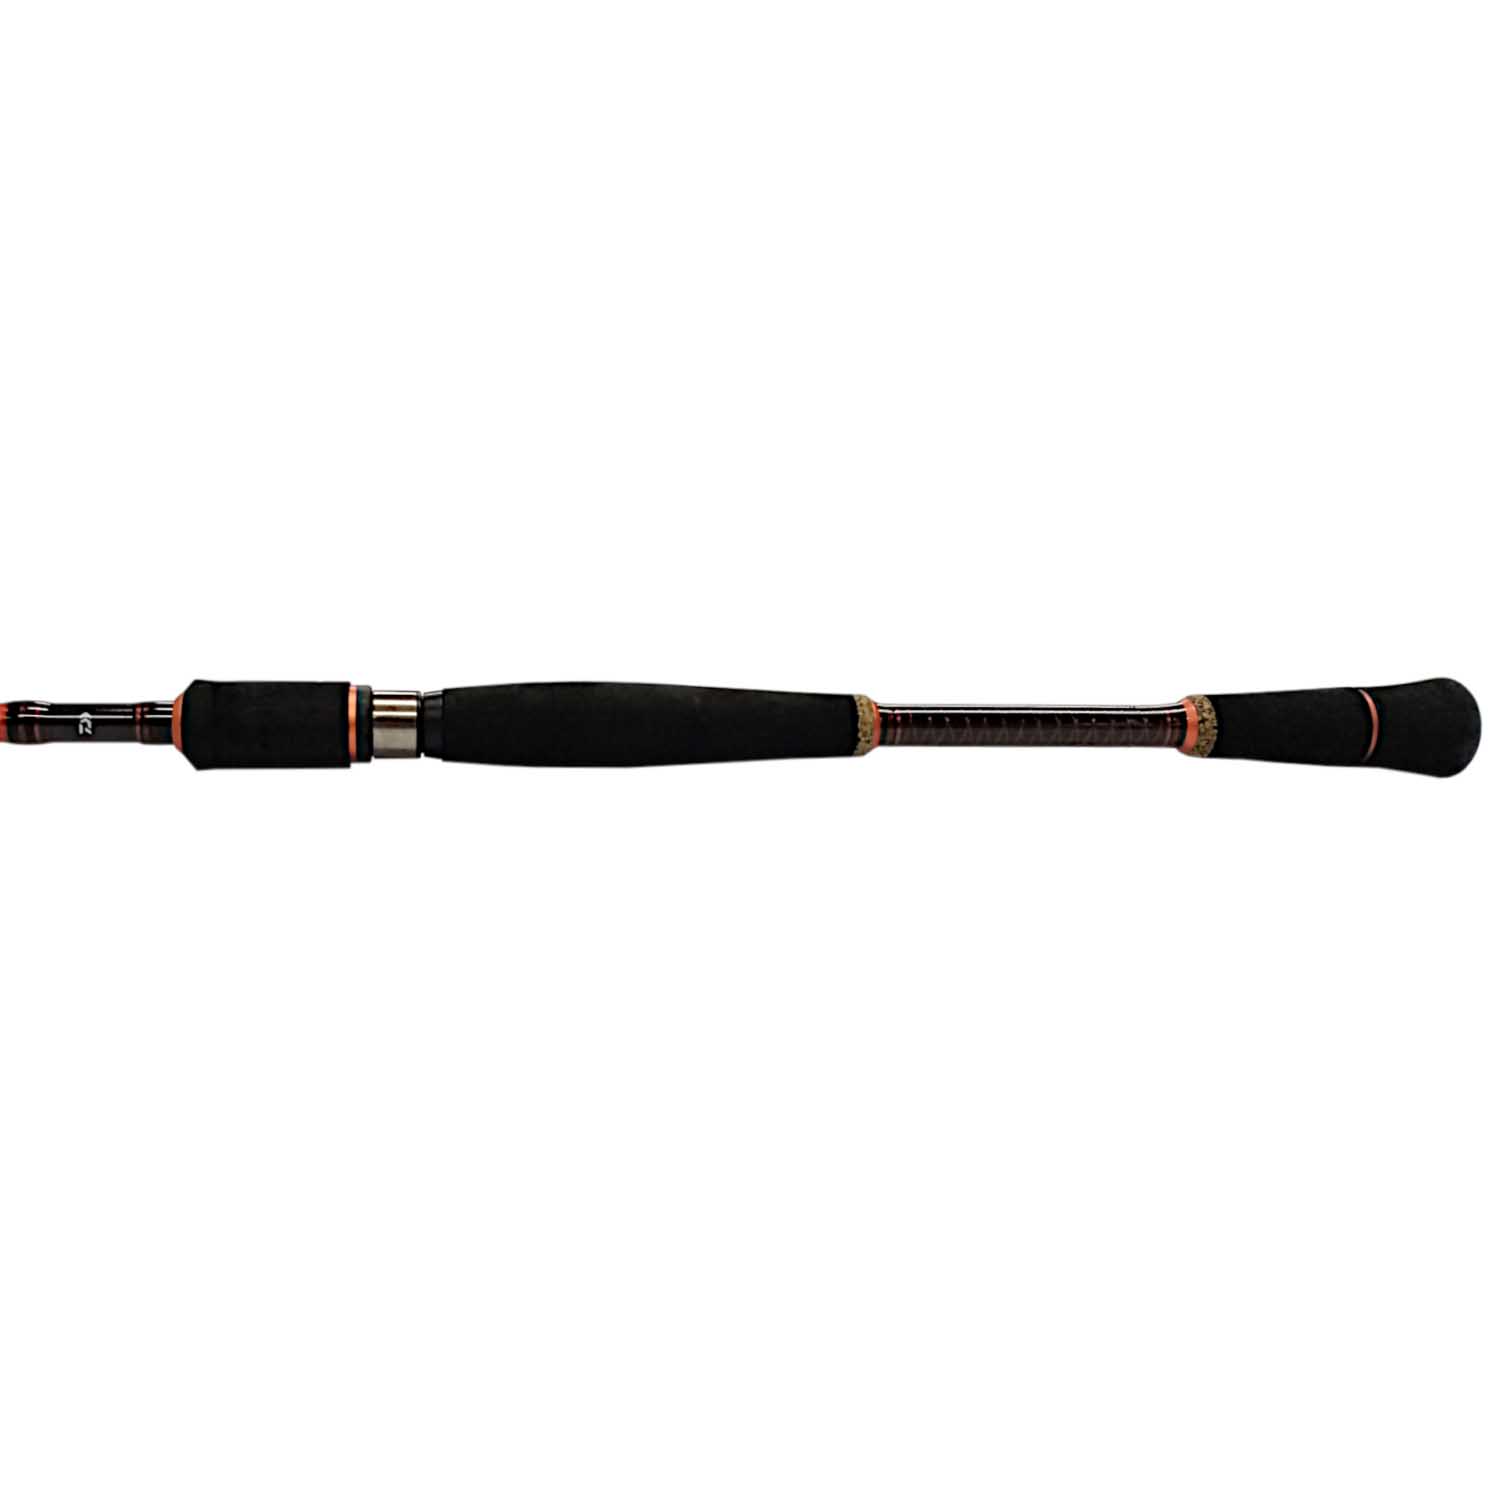 https://www.showspace.co.za/showspaceimages/kingfisher/10-01-391.Rod_Daiwa_Cross_Fire_CF742MHFS-AF_10-35GR_rod_base_and_winch_hfyzgd.jpg